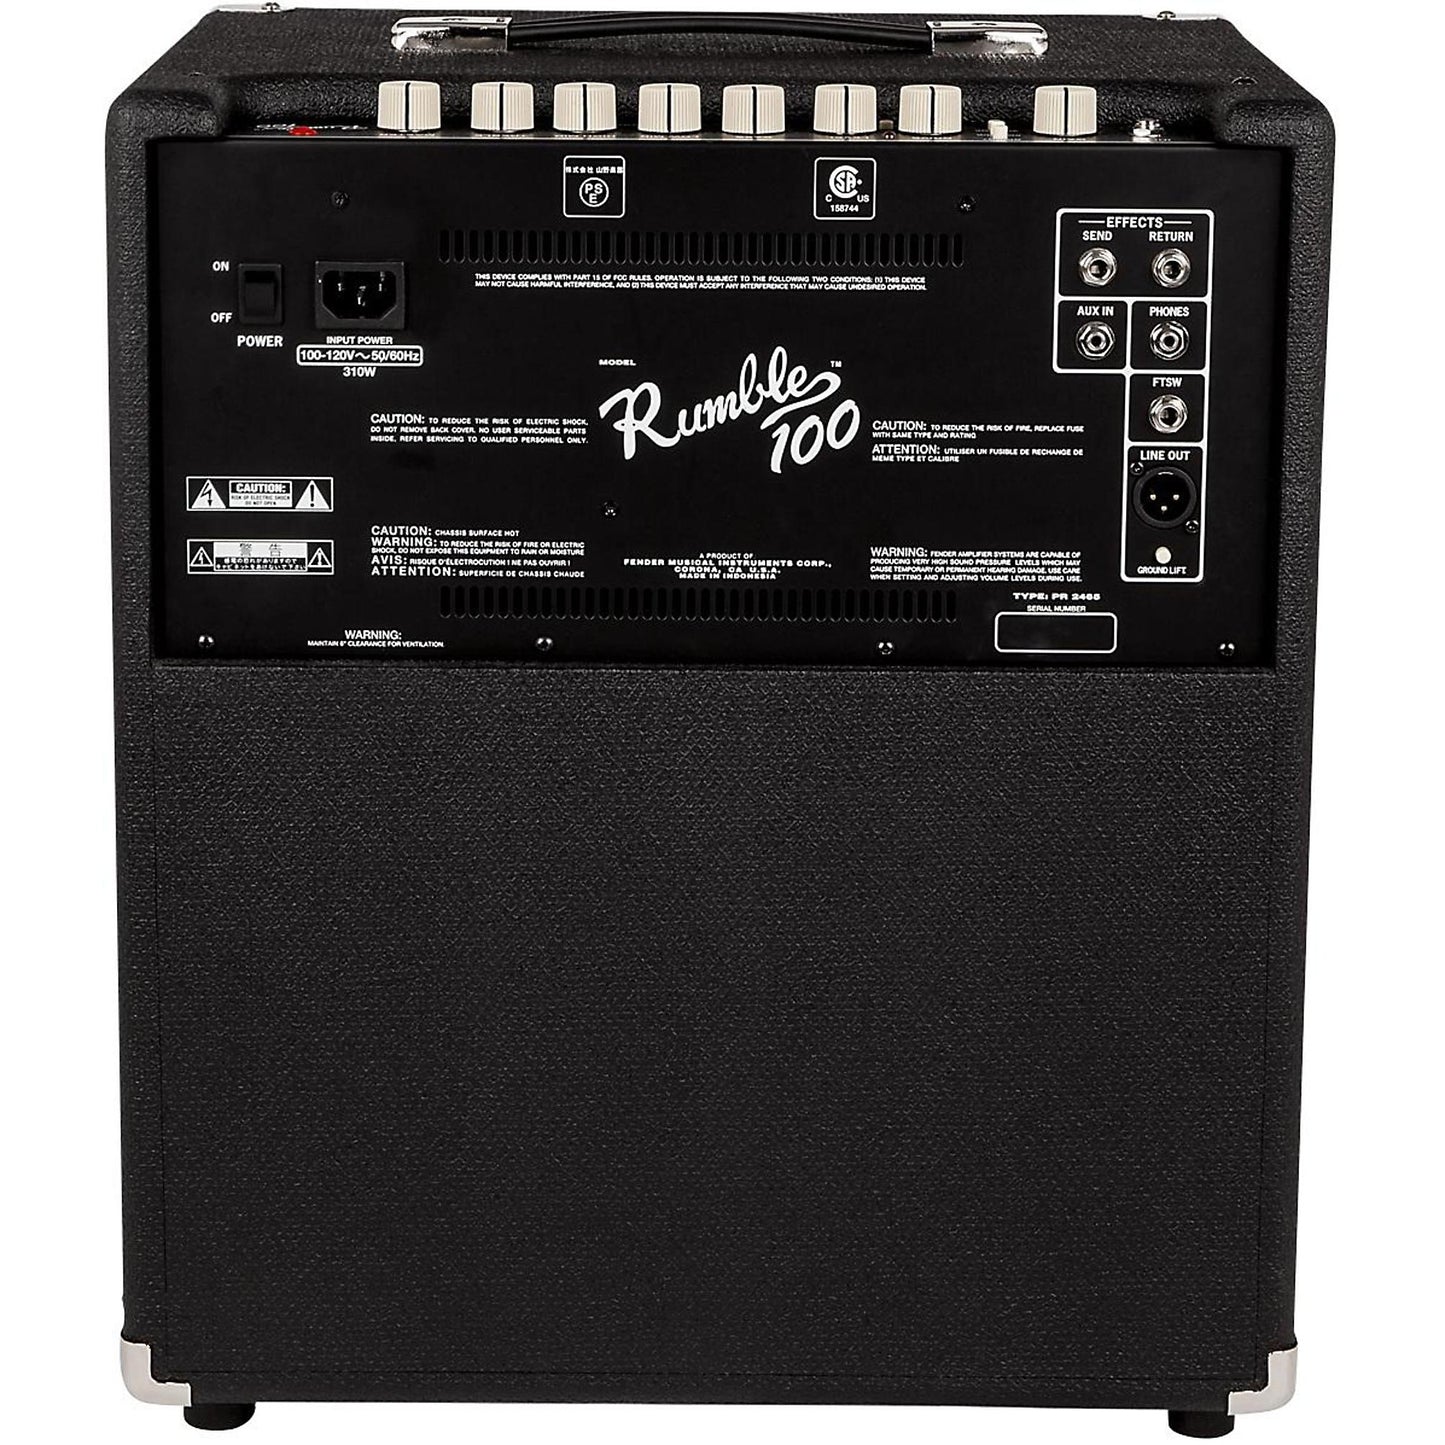 Fender Rumble 100 Electric Bass Combo Amplifier 100watts 120V (230V EUR) Lightweight with 12in Speaker XLR Line Out Ground Lift 4-Band EQ